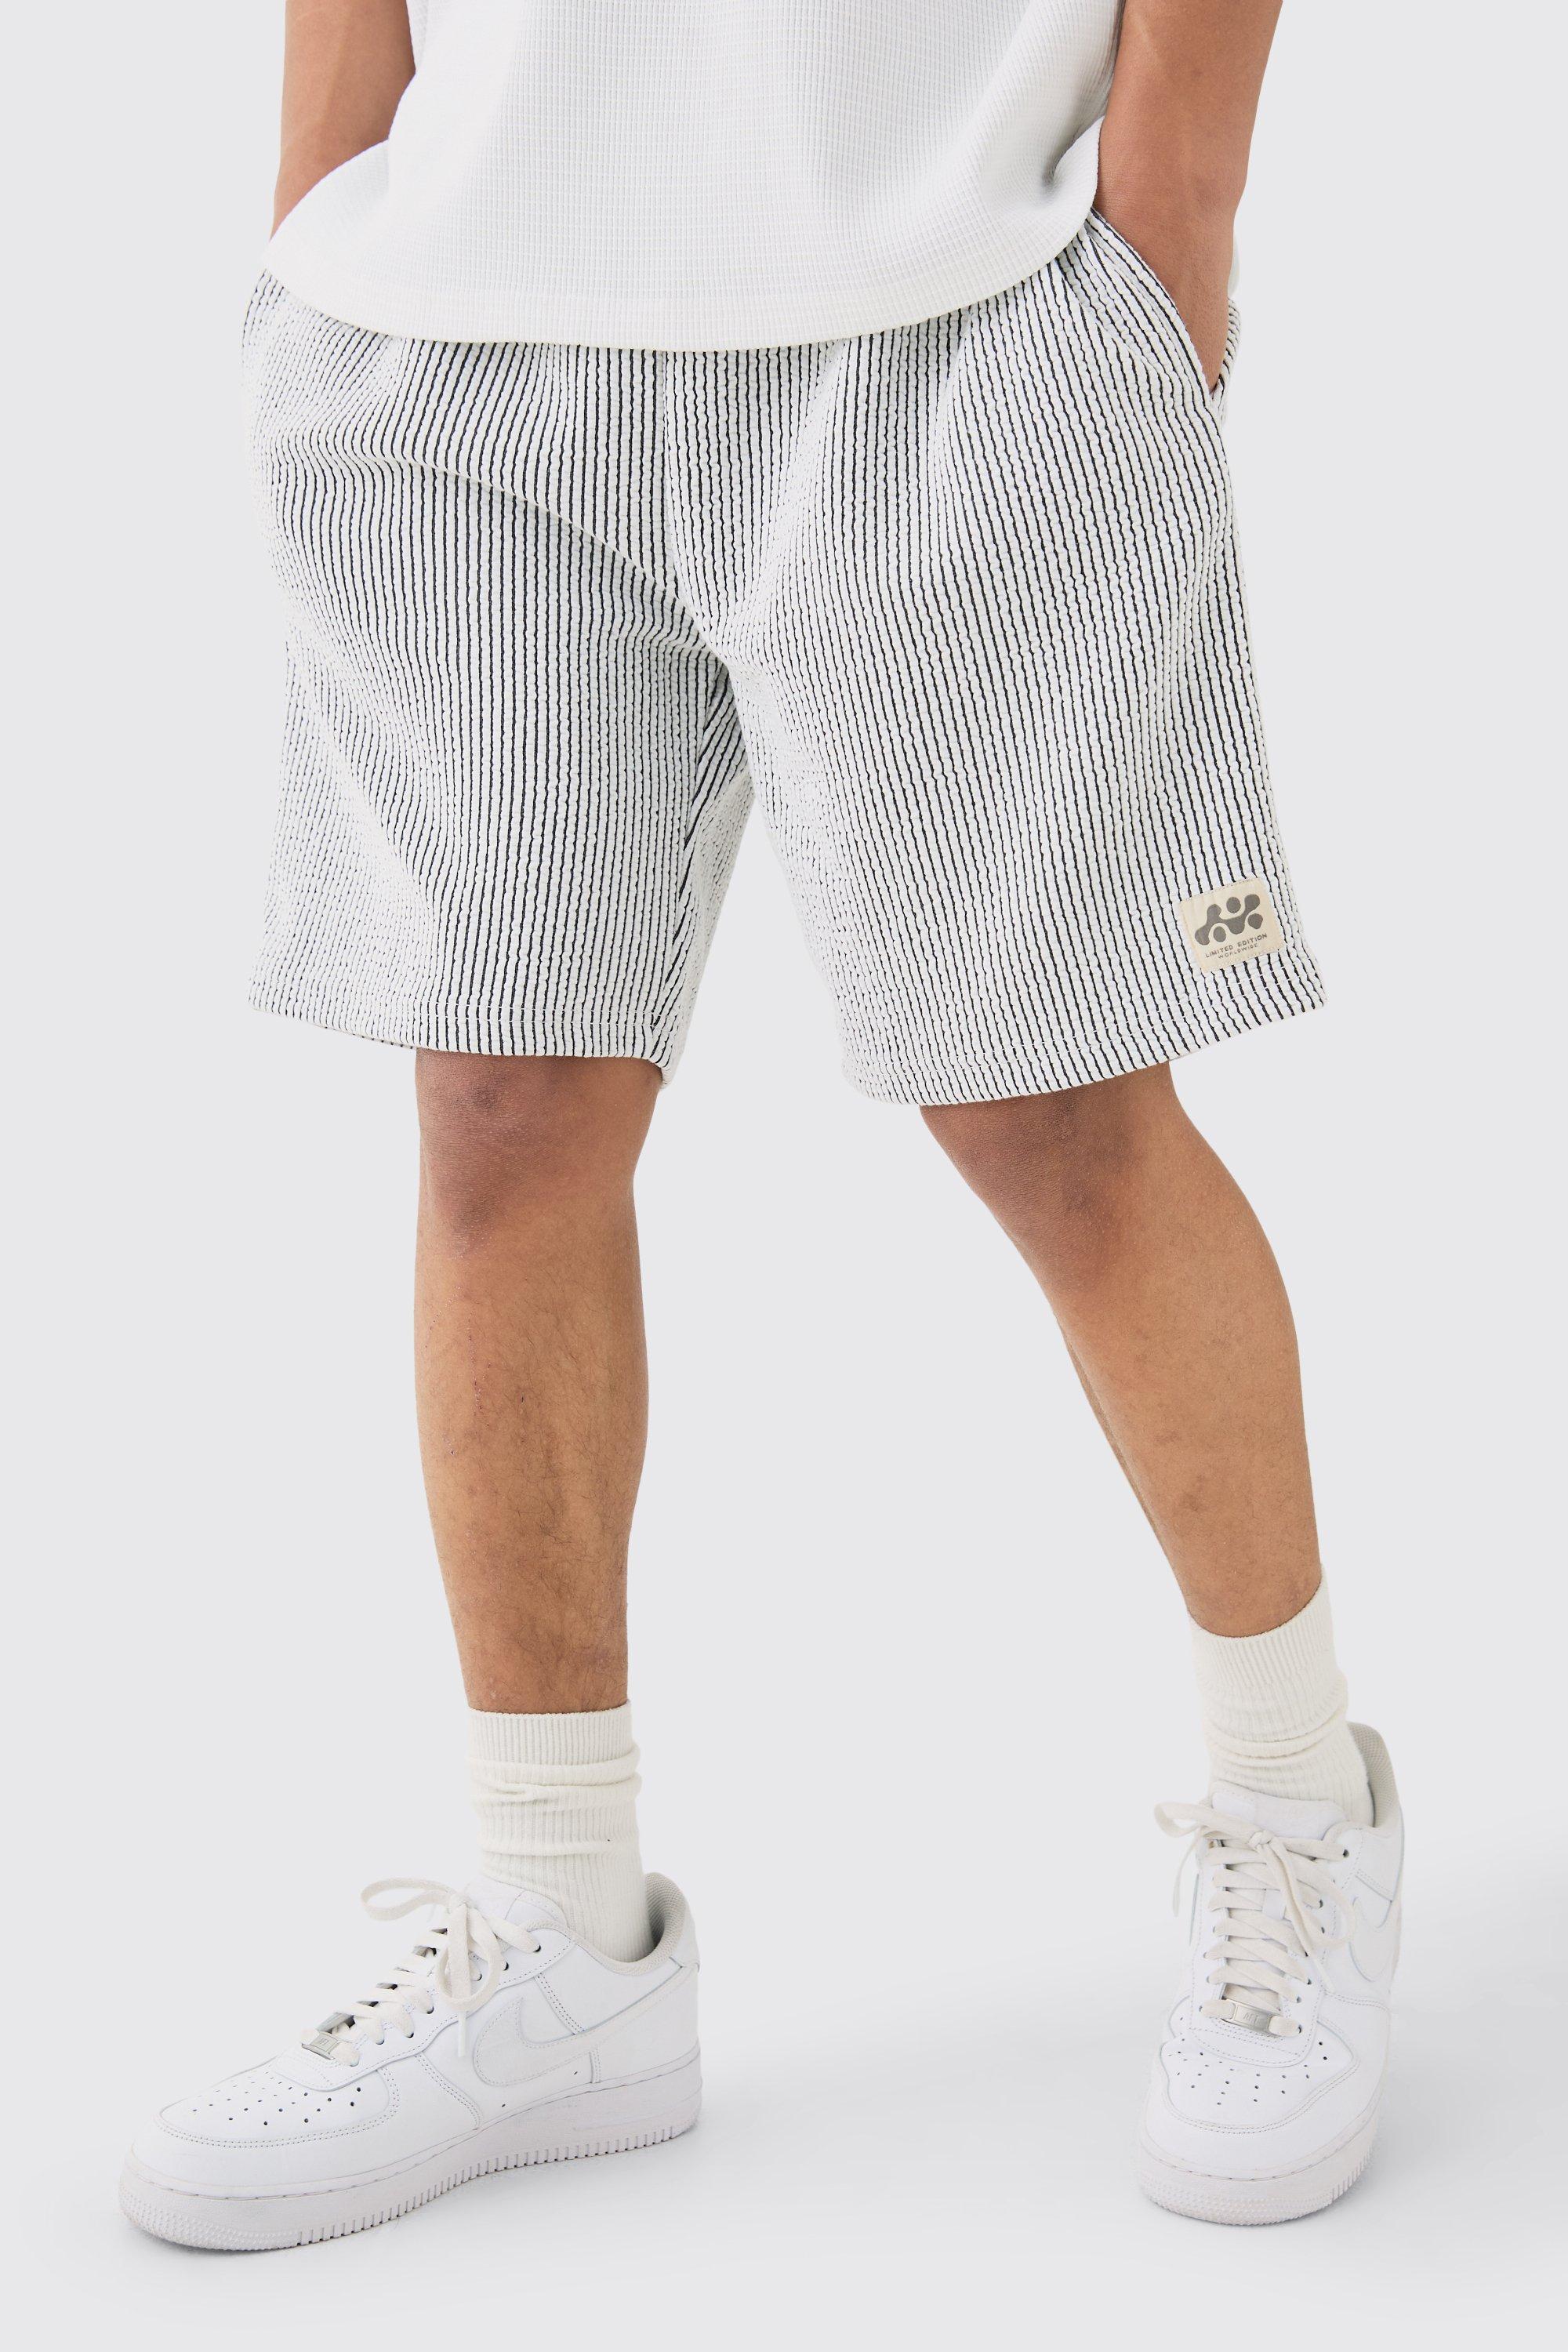 Image of Relaxed Mid Length Textured Short With Woven Tab, Bianco